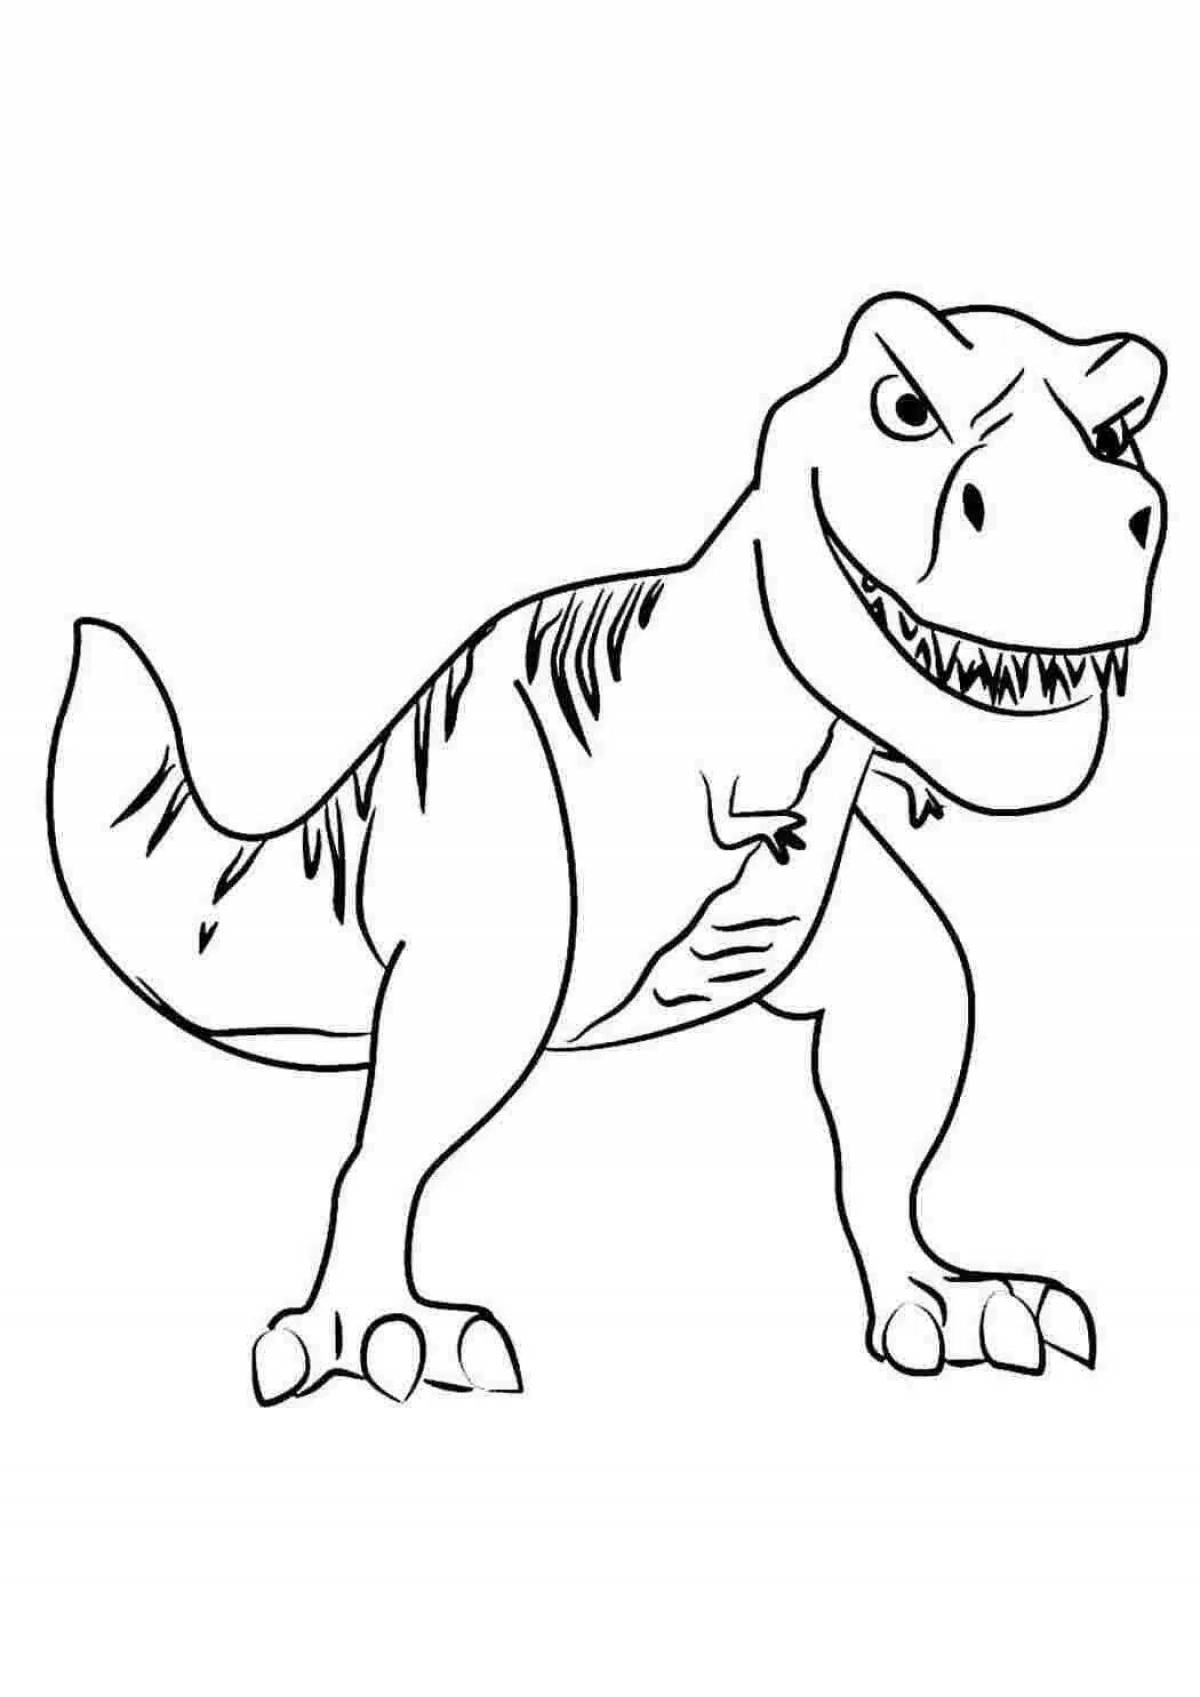 Fairy tyrannosaurus coloring book for kids